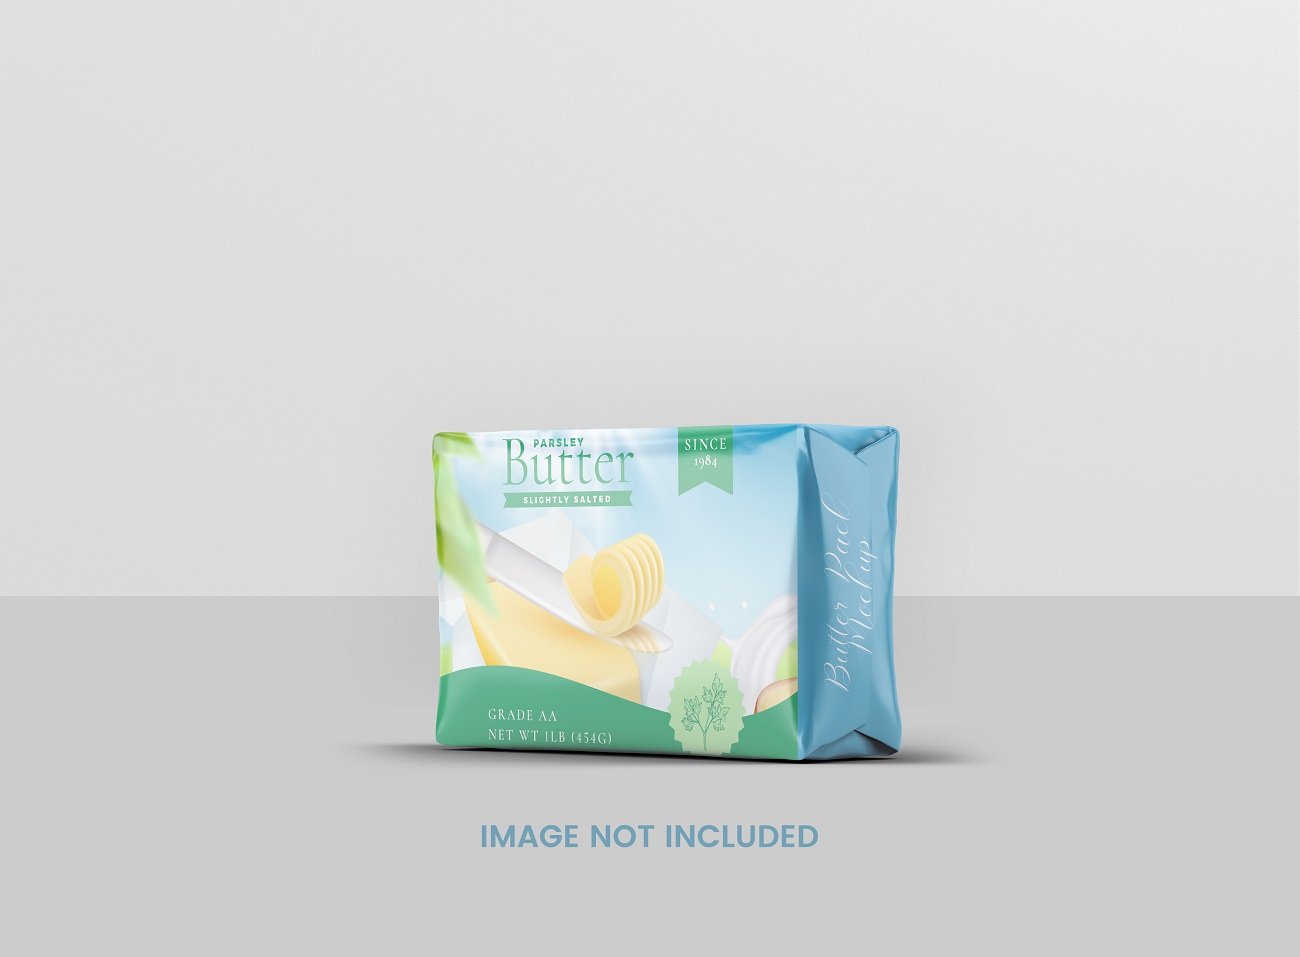 Template #332905 Package Butter Webdesign Template - Logo template Preview